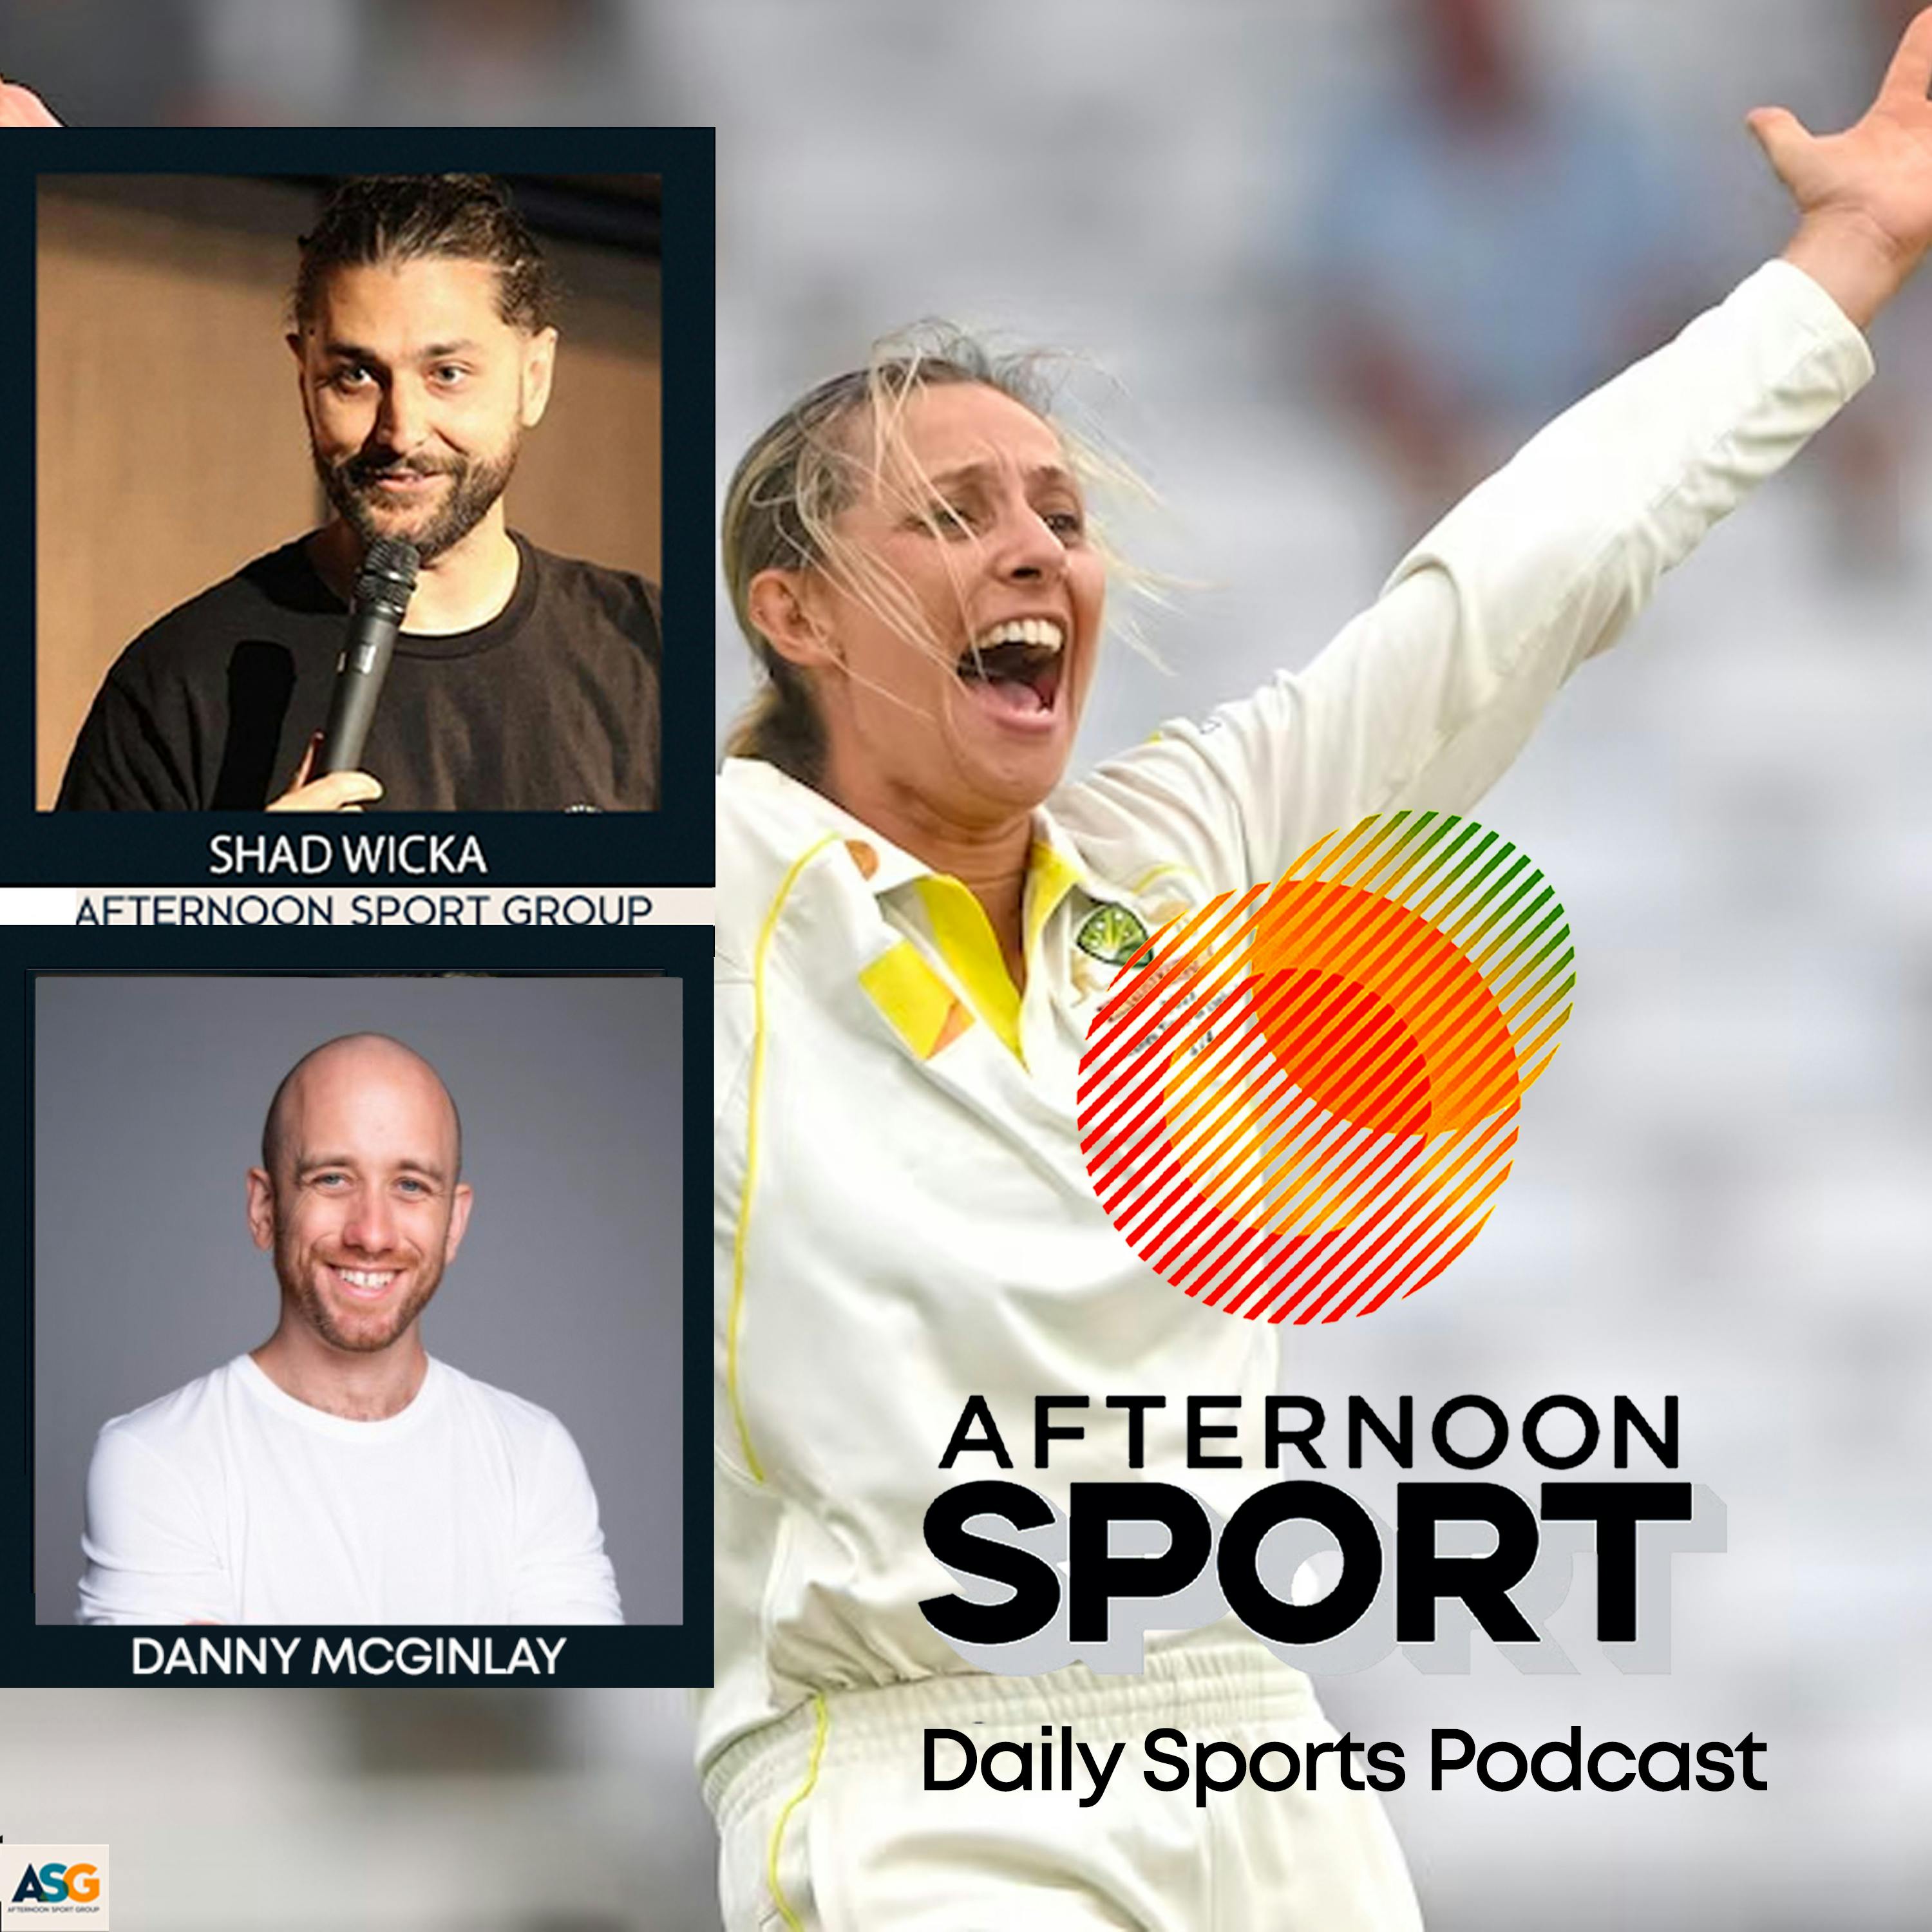 26th June Shad Wicka & Danny McGinlay: Women’s Ashes Update,  Carlos ”The Rock” Alcaraz, sack your coach to win the game, the AFL ladder + more!